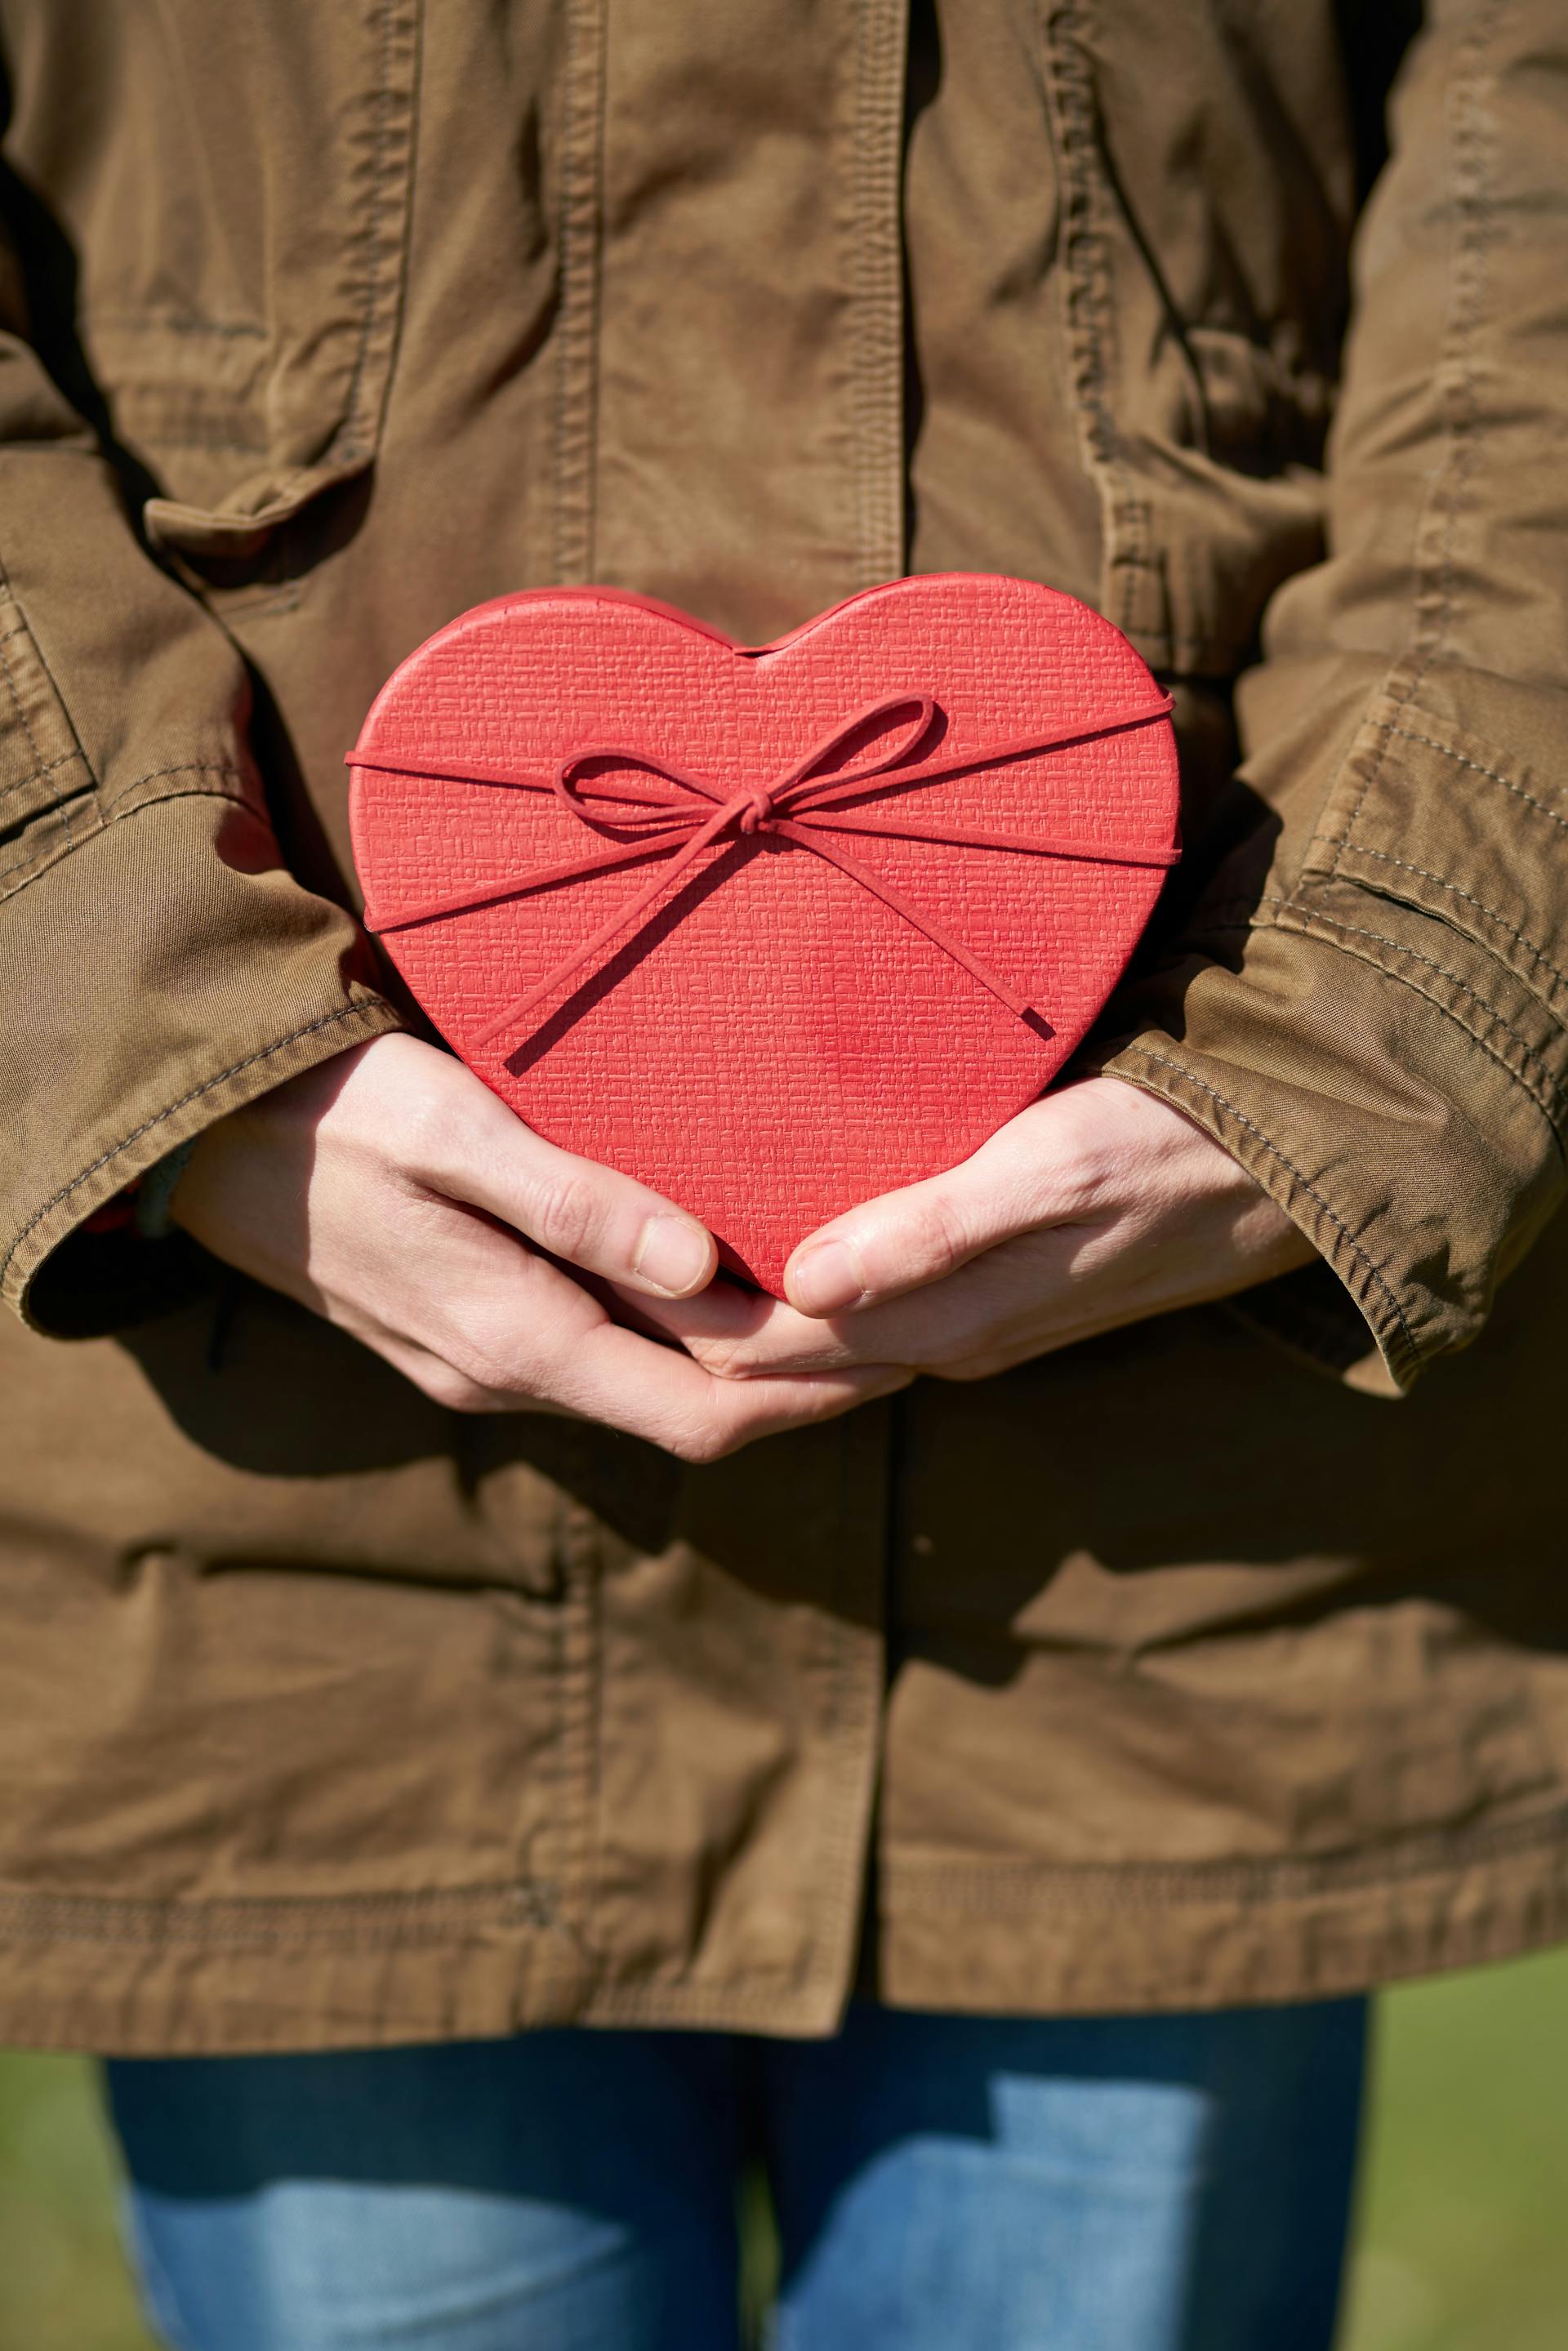 Person holding a heart-shaped gift | Source: Pexels